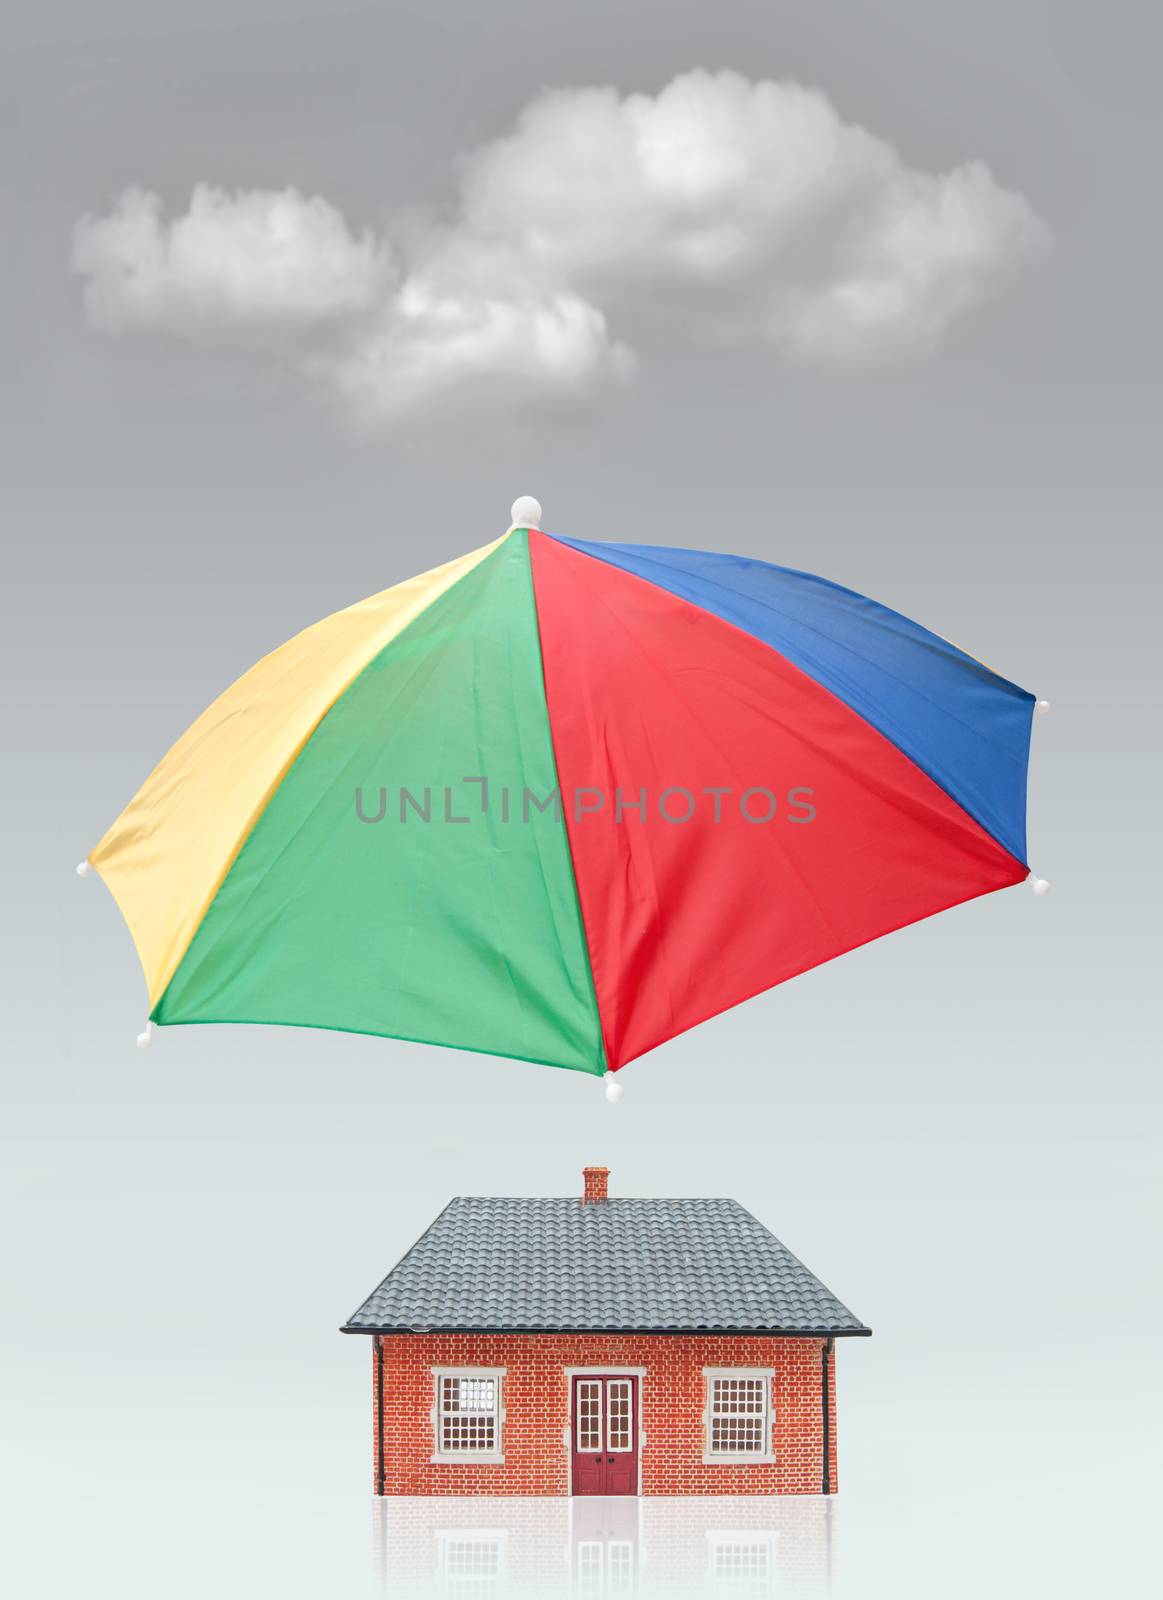 Umbrella shielding a home from a hovering cloud